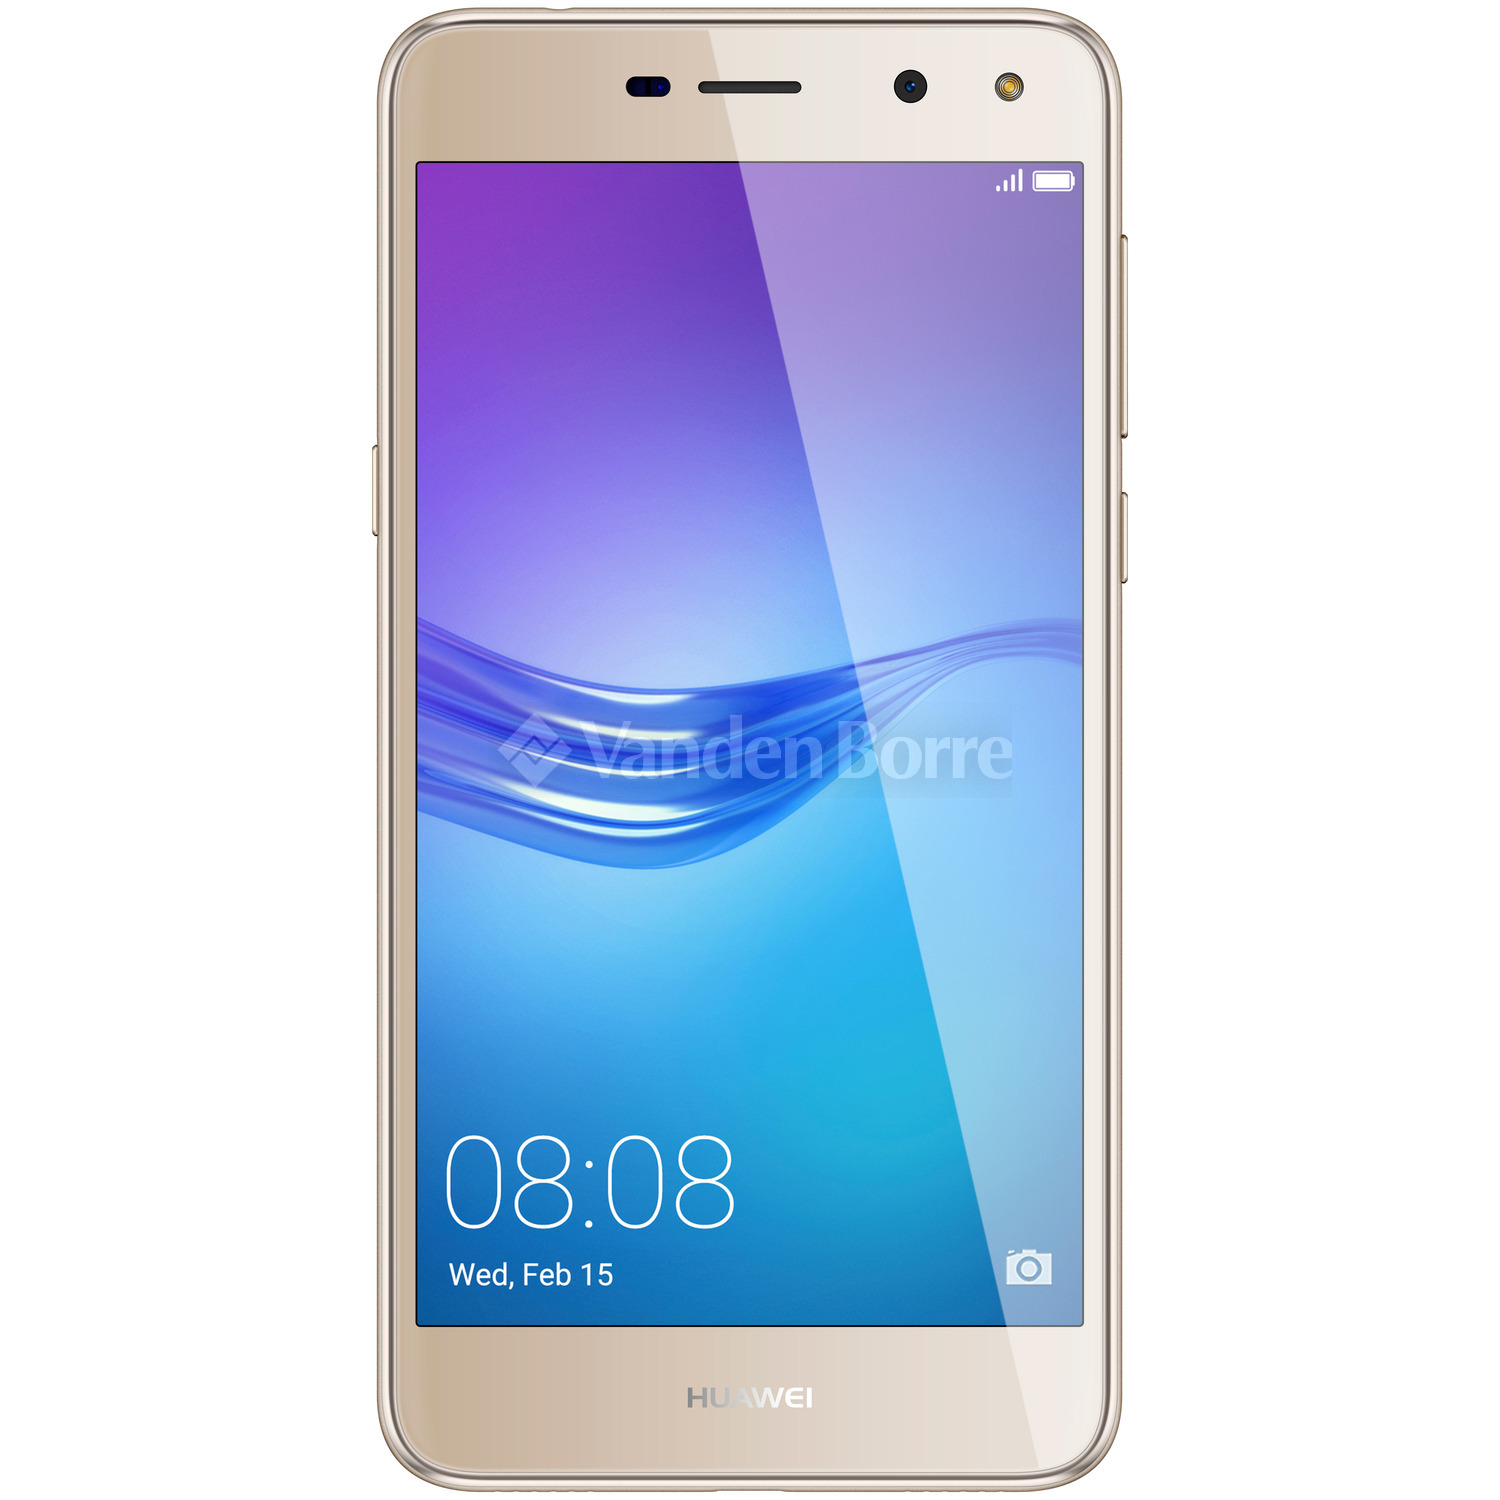 coque huawei y6 2017 gold